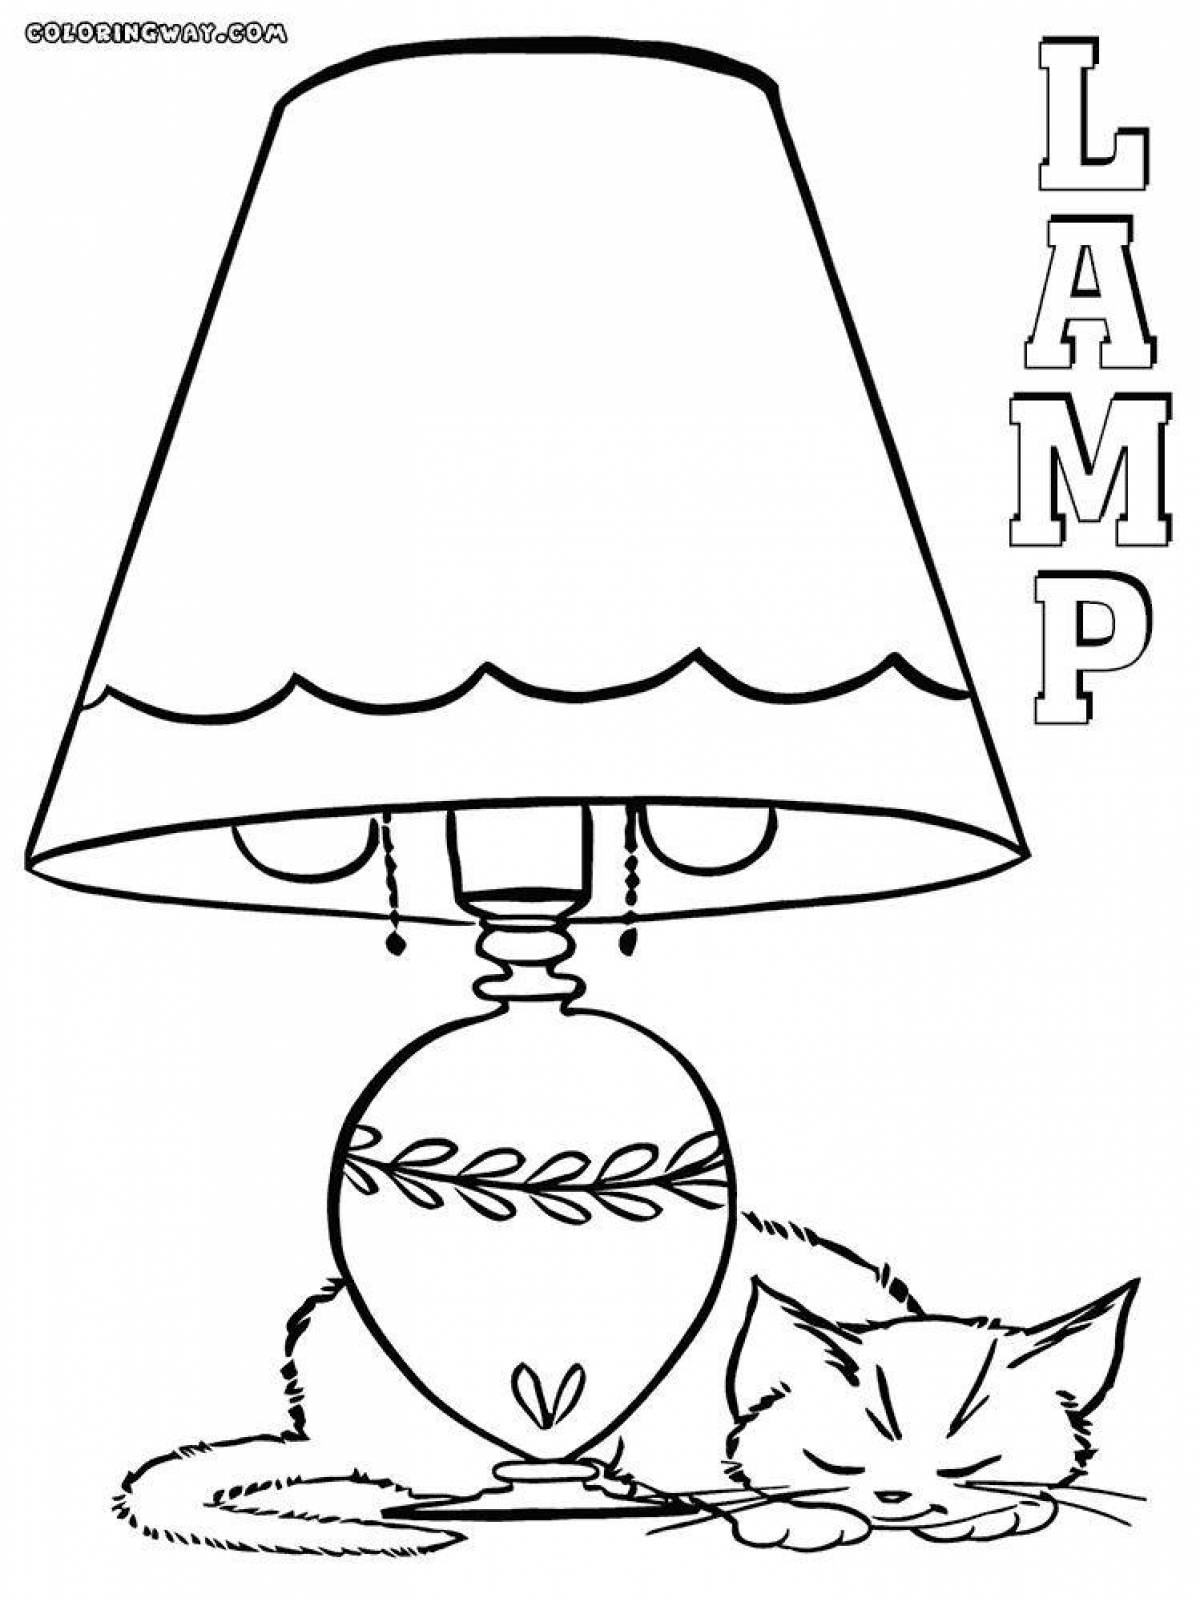 Blinding lamp coloring page